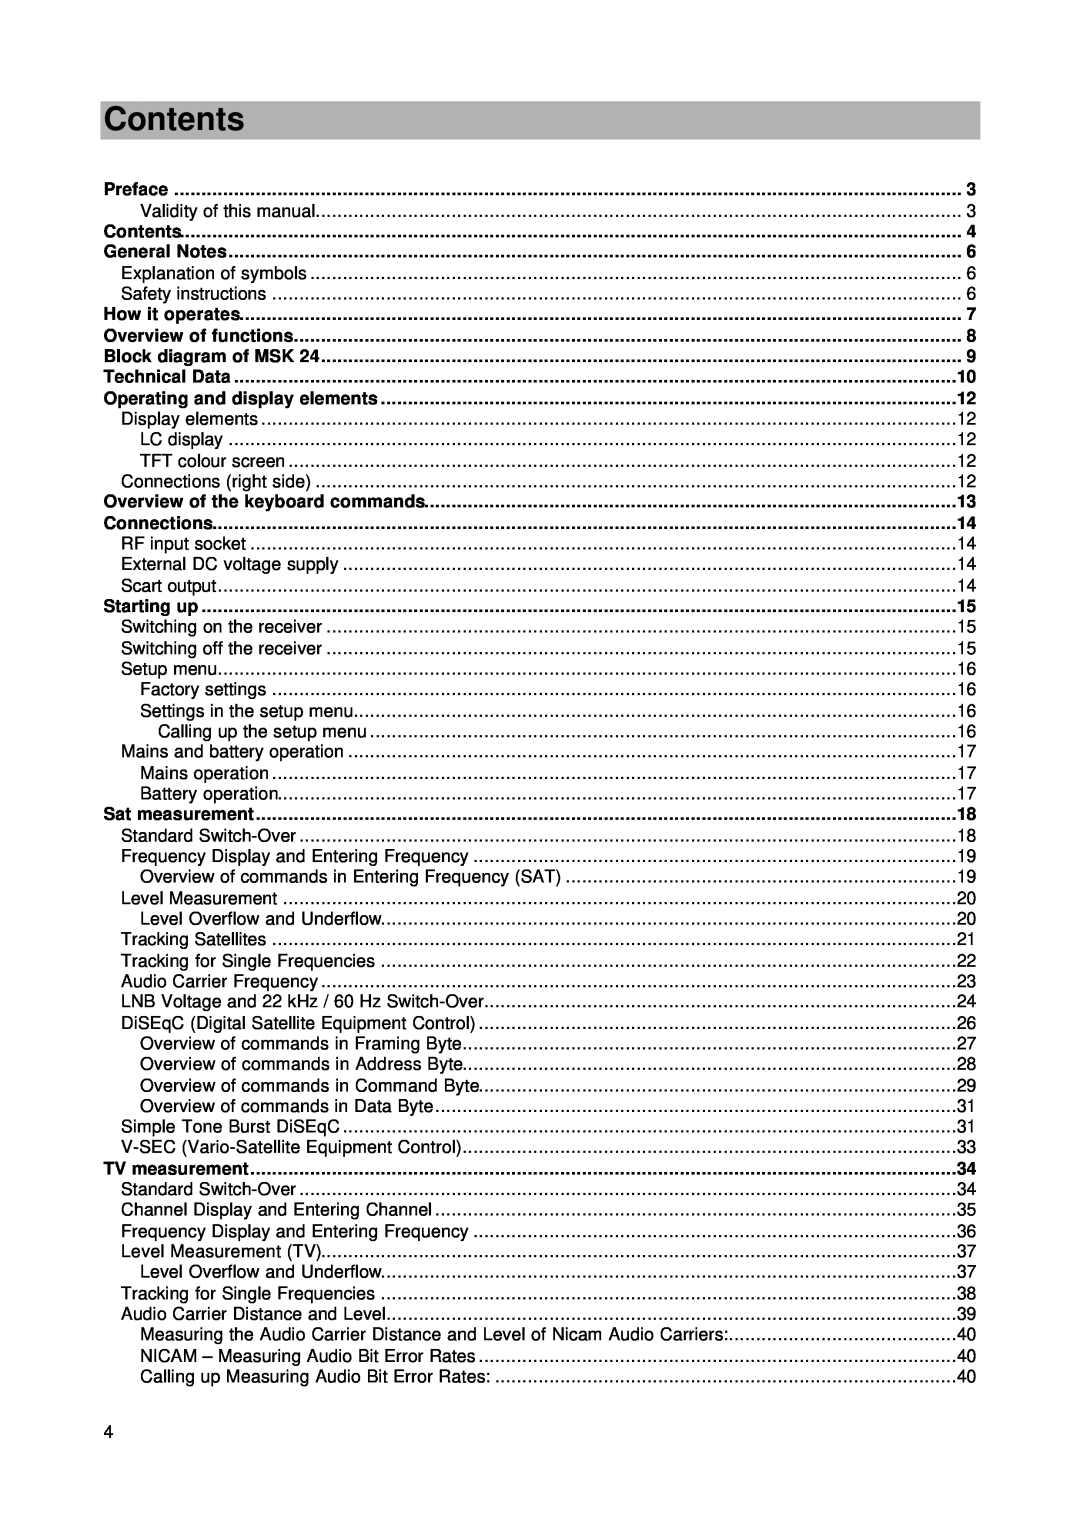 Kathrein MSK 24 manual Contents, Overview of the keyboard commands, Connections, Sat measurement, TV measurement 